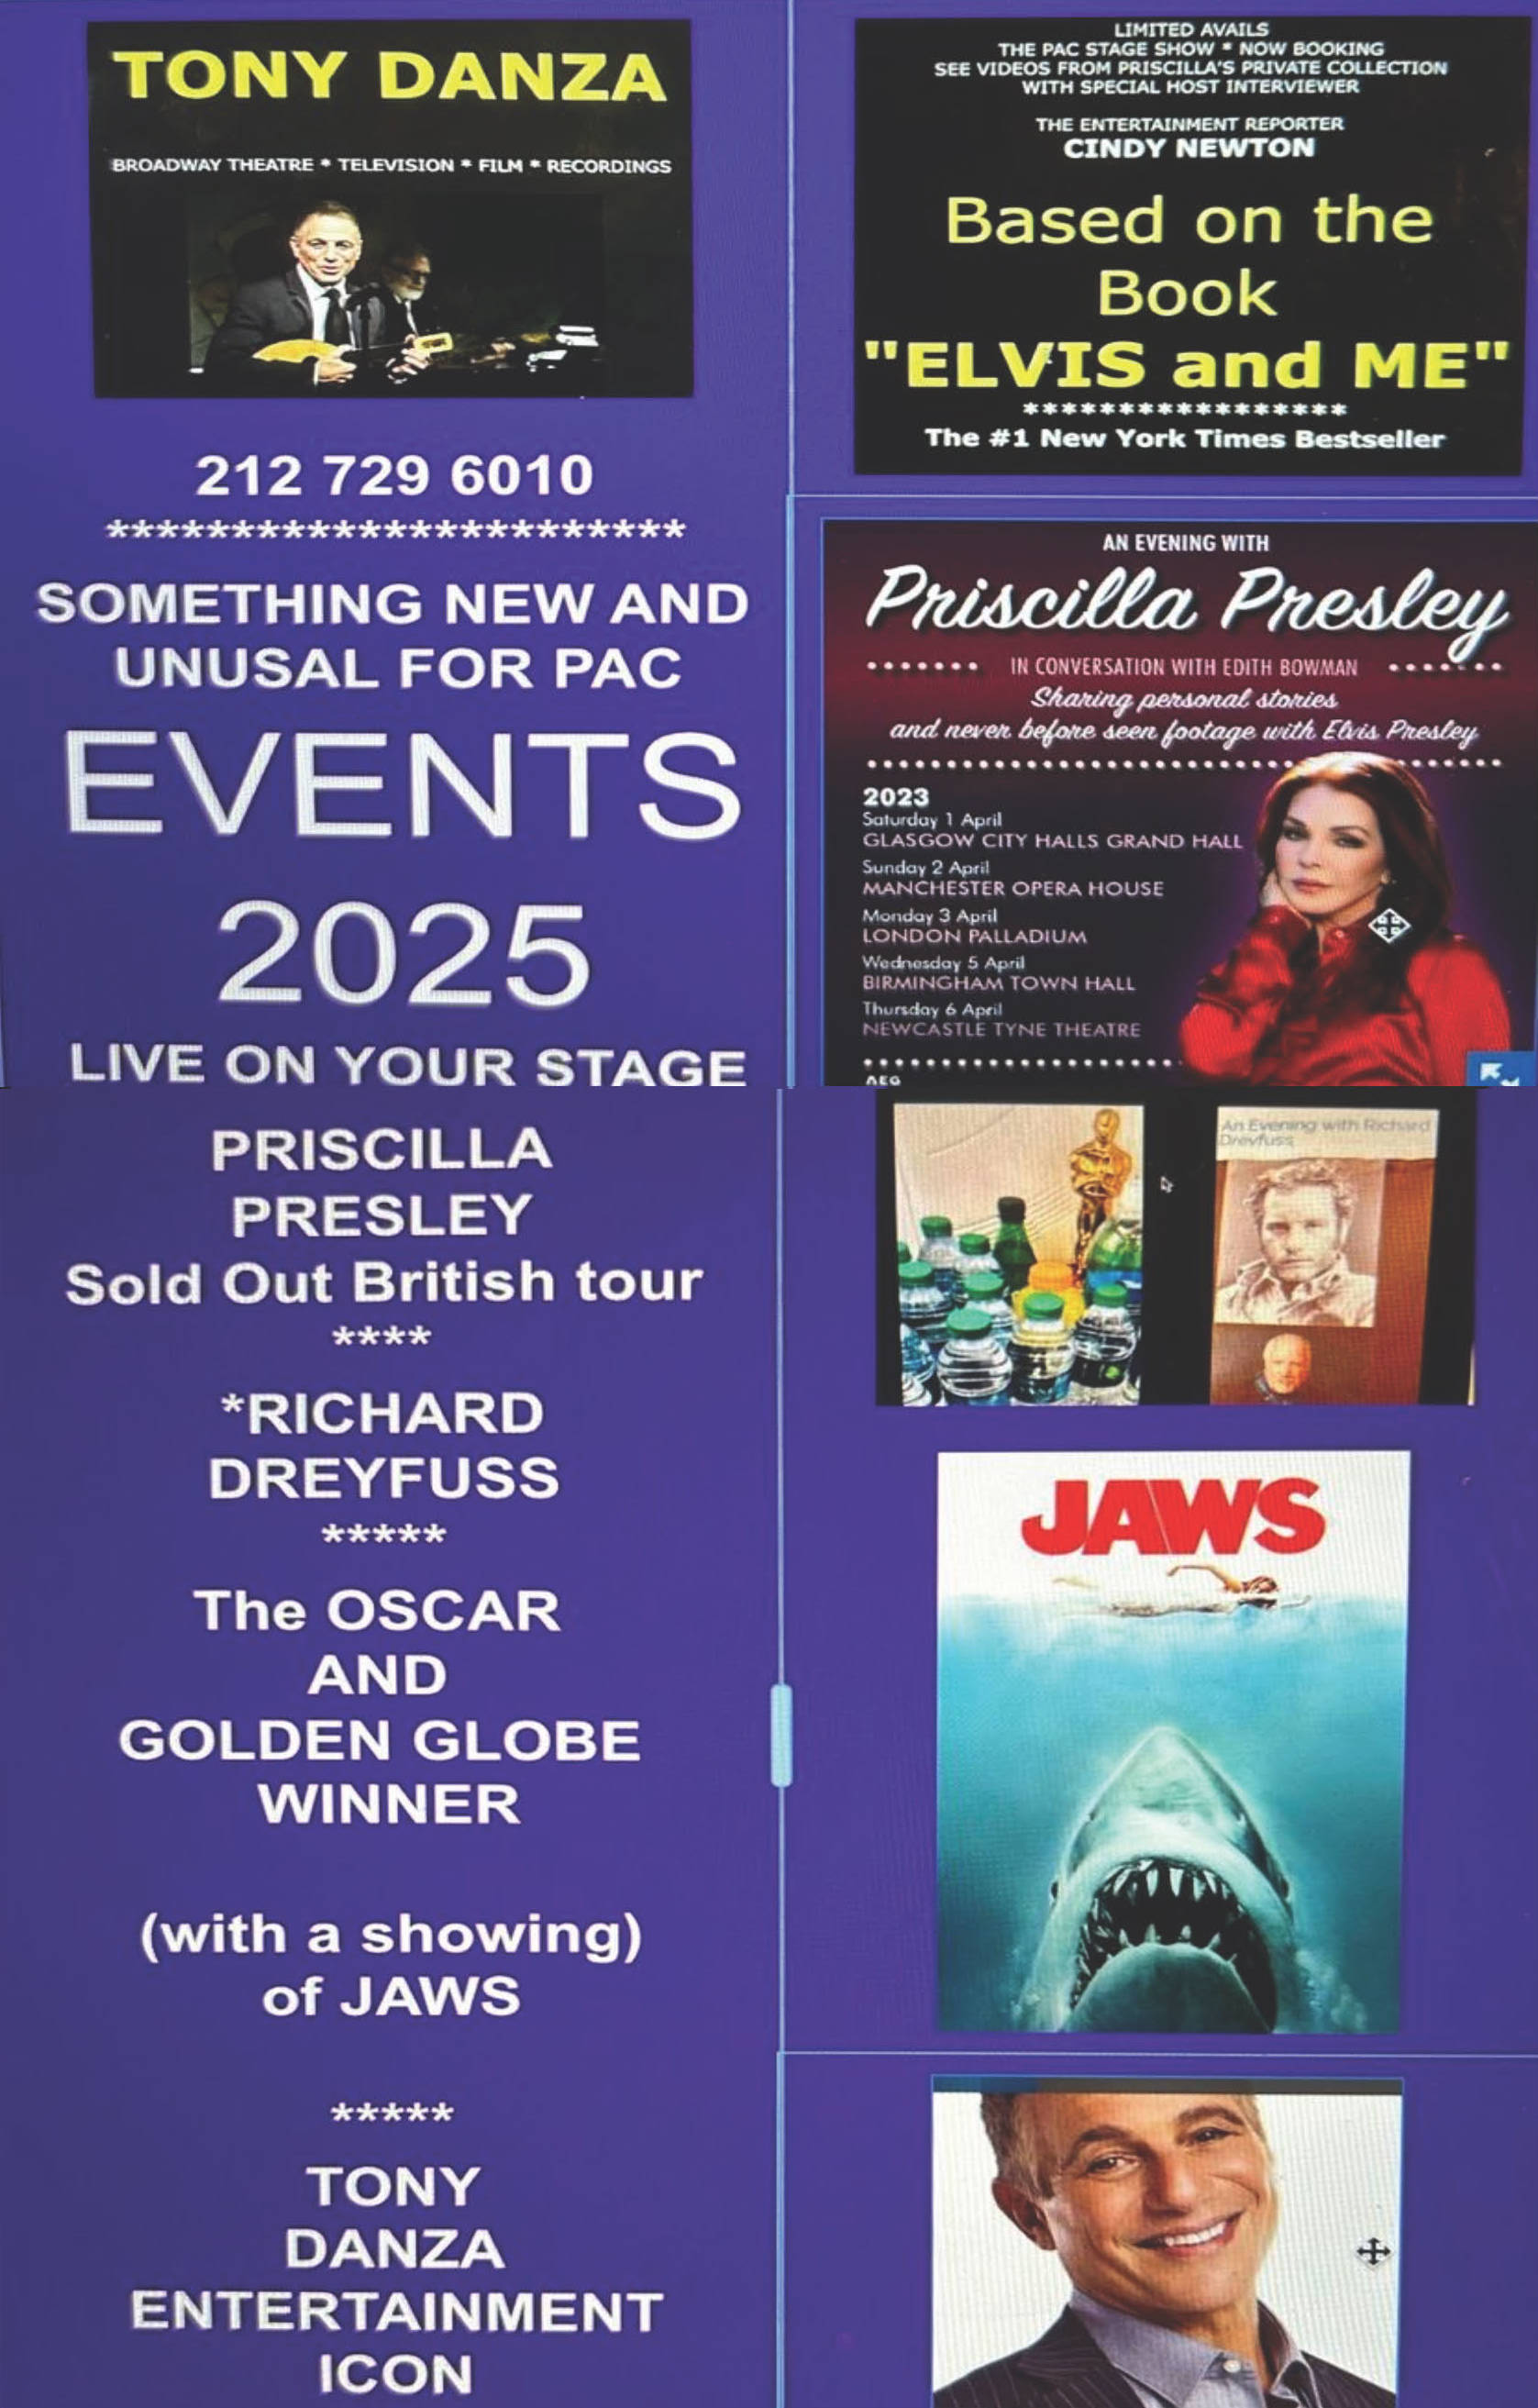 Something new and unusual for PAC; Events 2025